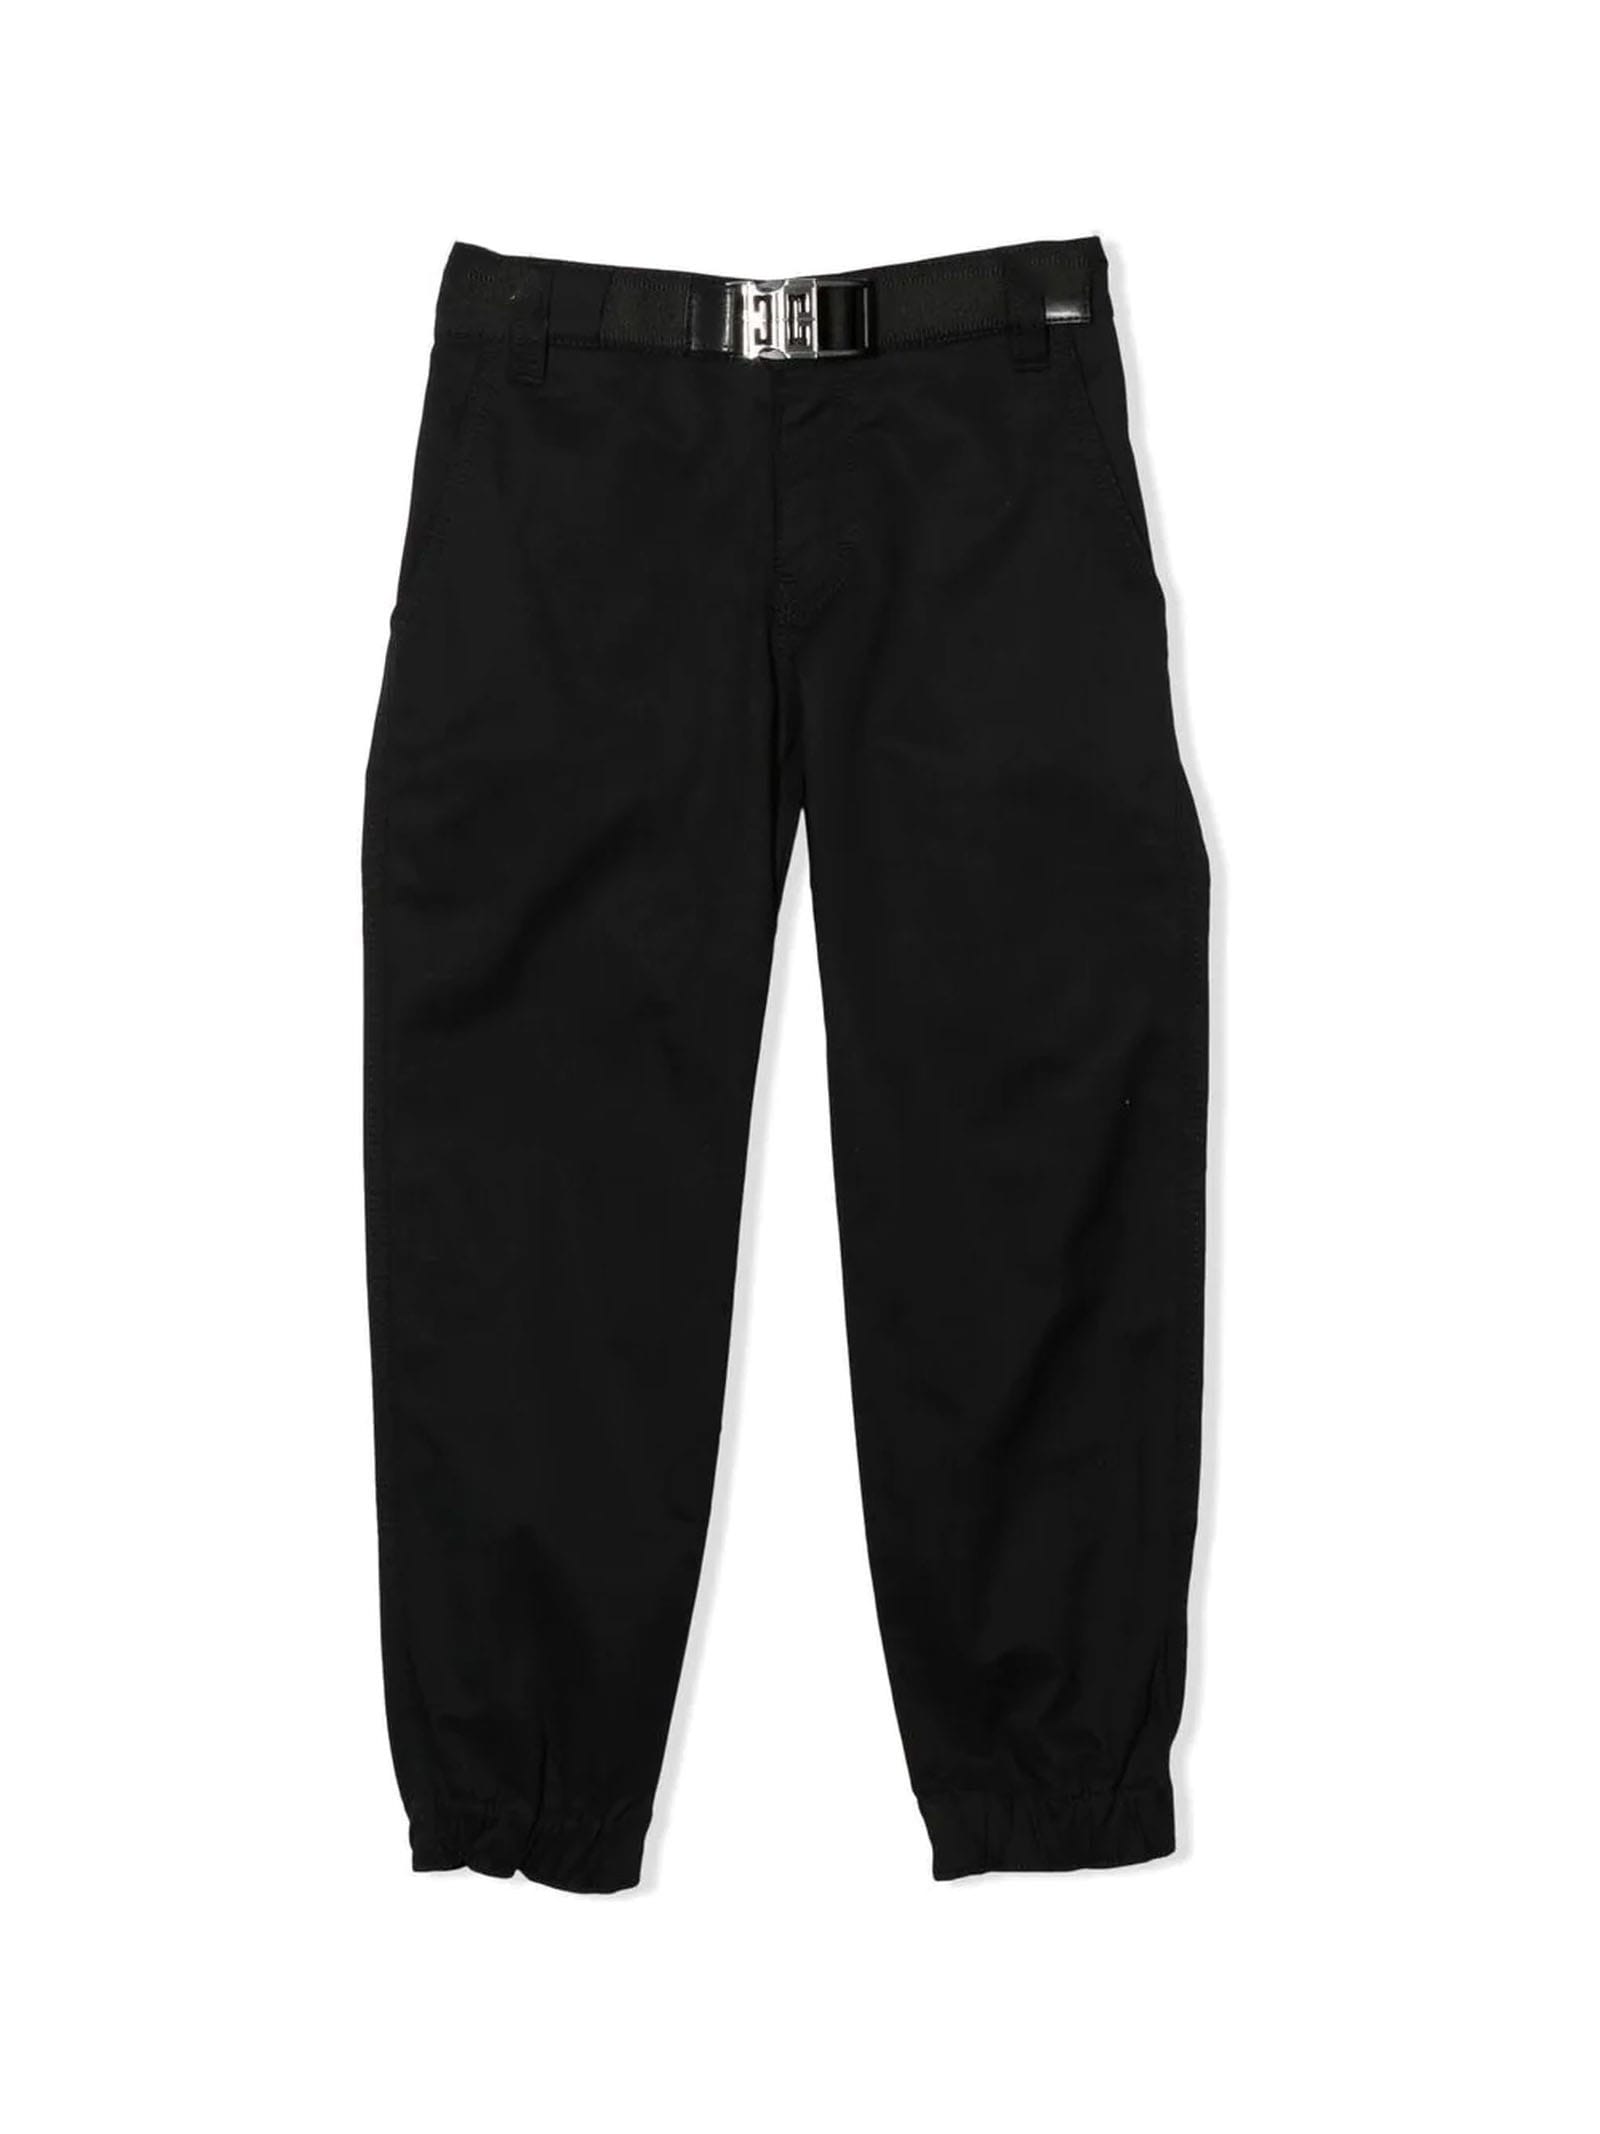 Givenchy Black Cotton Trousers